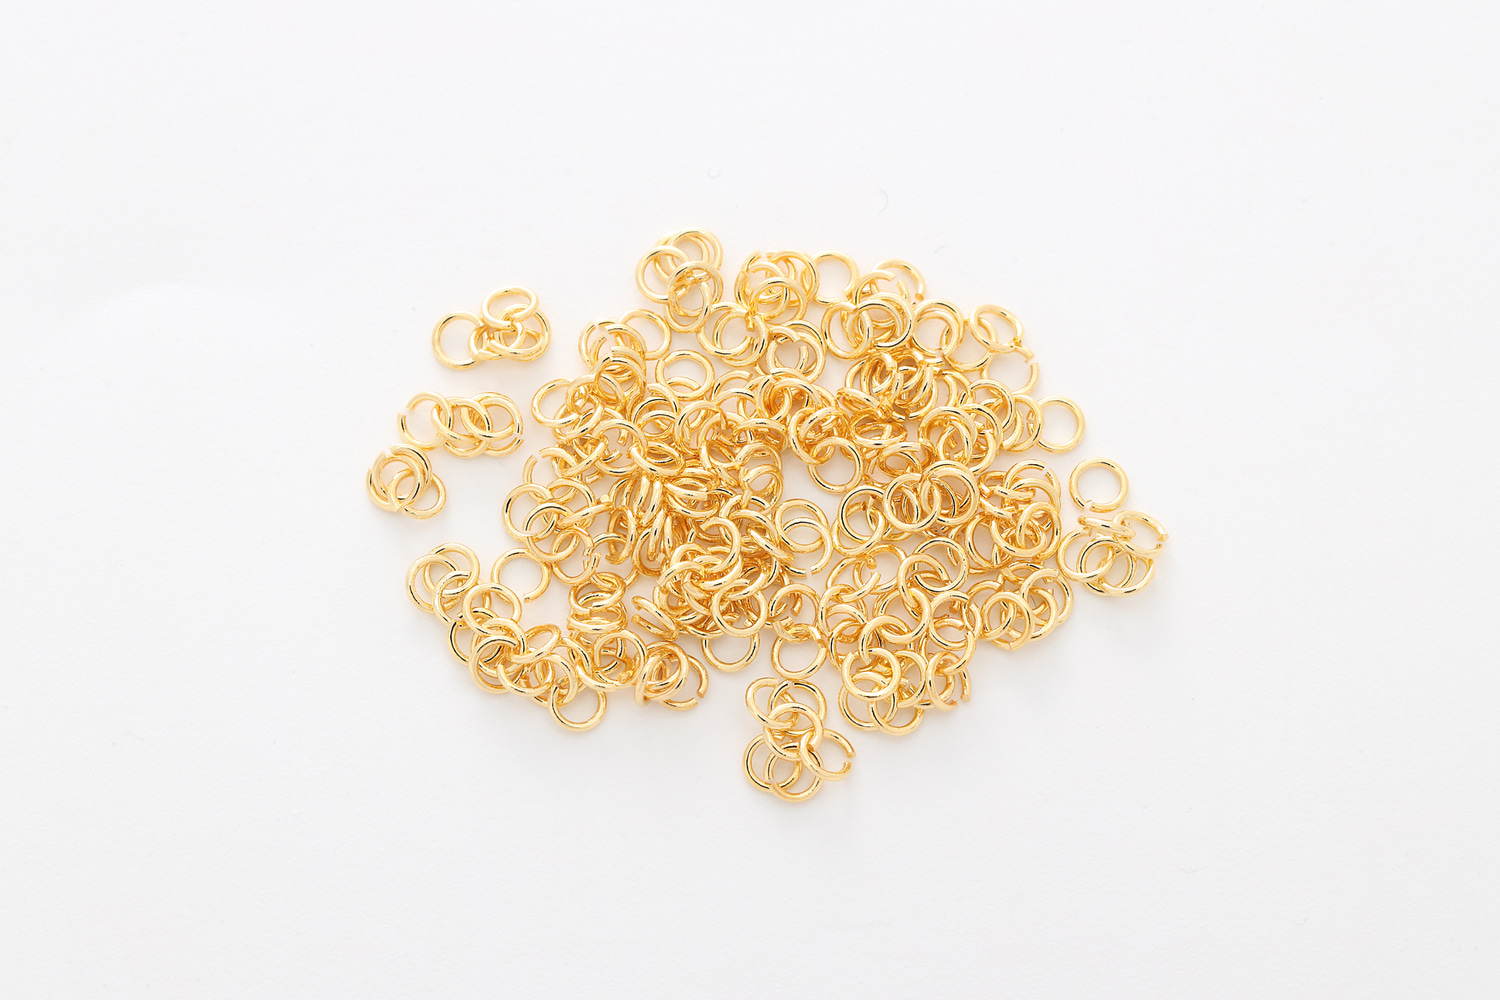 [J16-G3] Jump Ring, 0.5mm thick, Inner 2mm, Gold Plated Brass, Nickel Free, Jewelry Component, Optional quantity